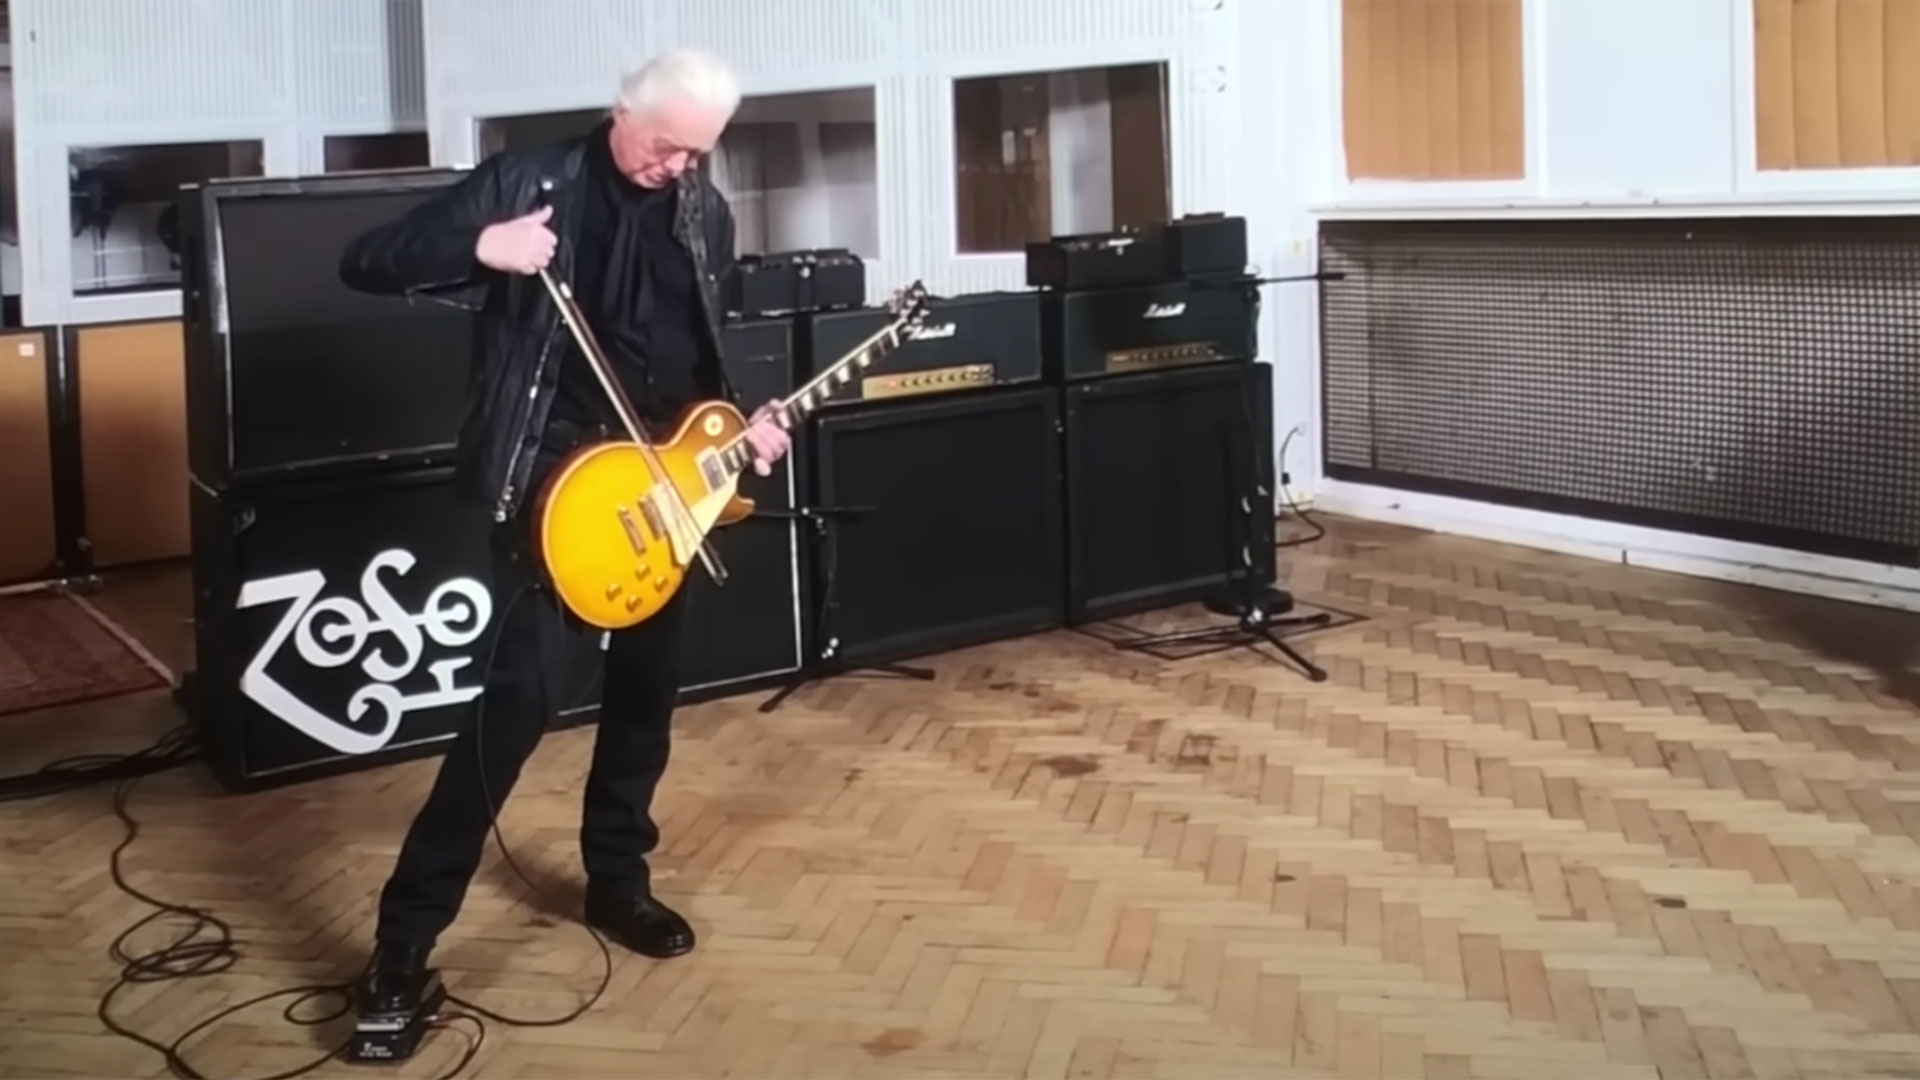 Watch Jimmy Page demo his most iconic guitar gear, including his Les Paul, the that Led Zeppelin I,” and the Gibson double-neck behind | Guitar World